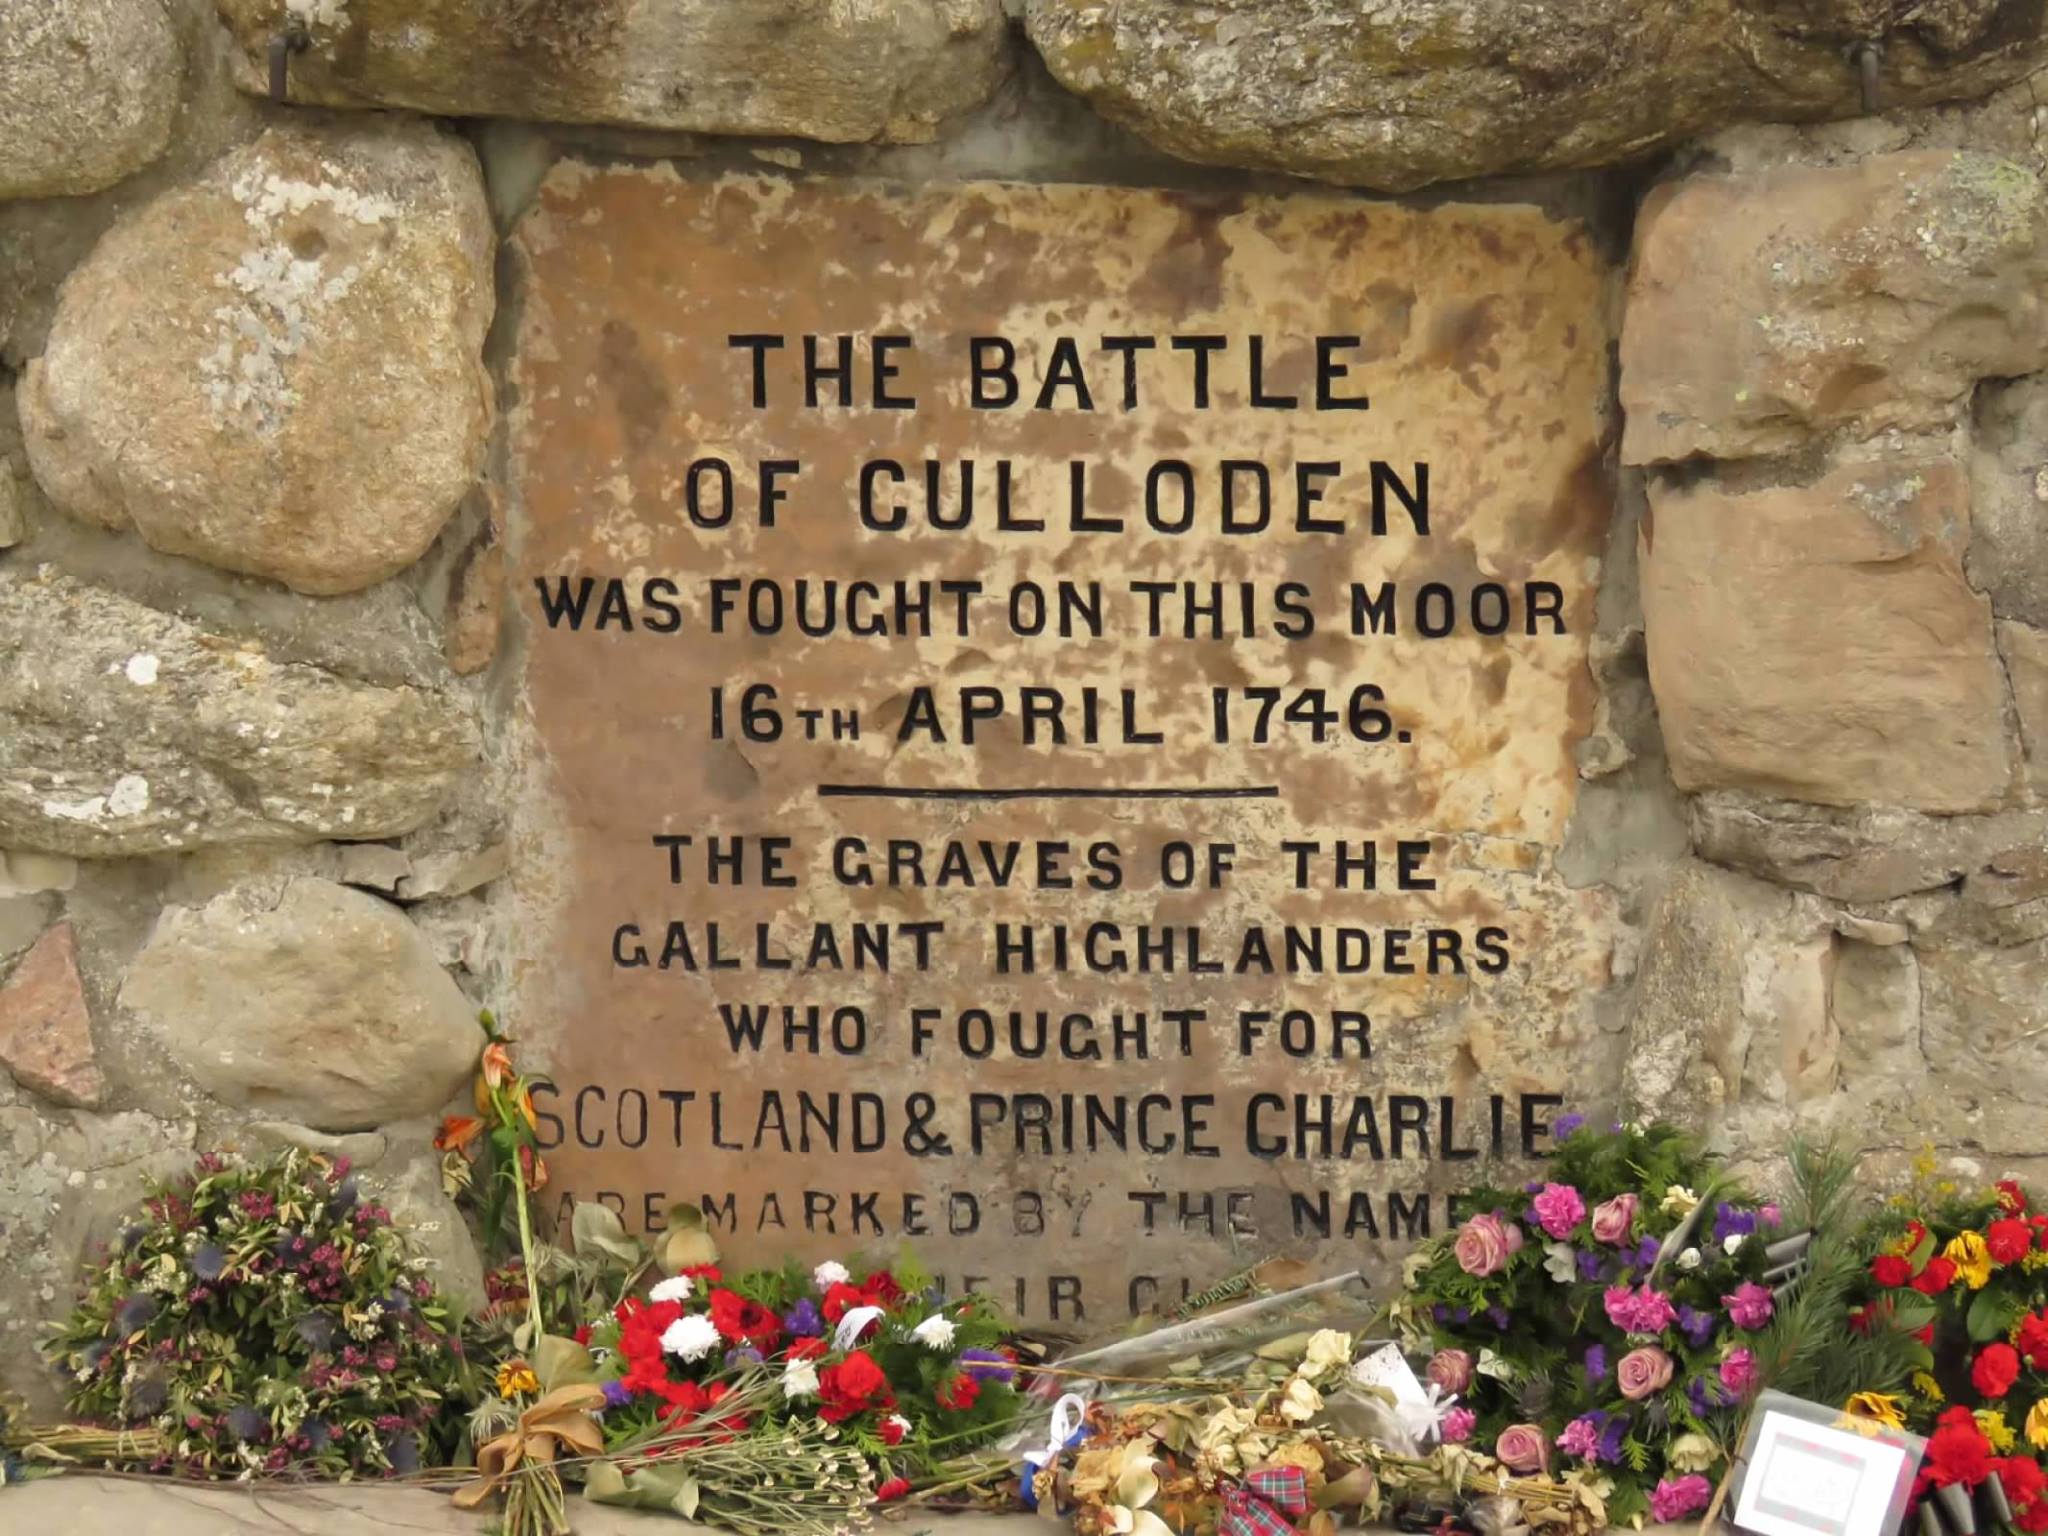 Culloden's memory